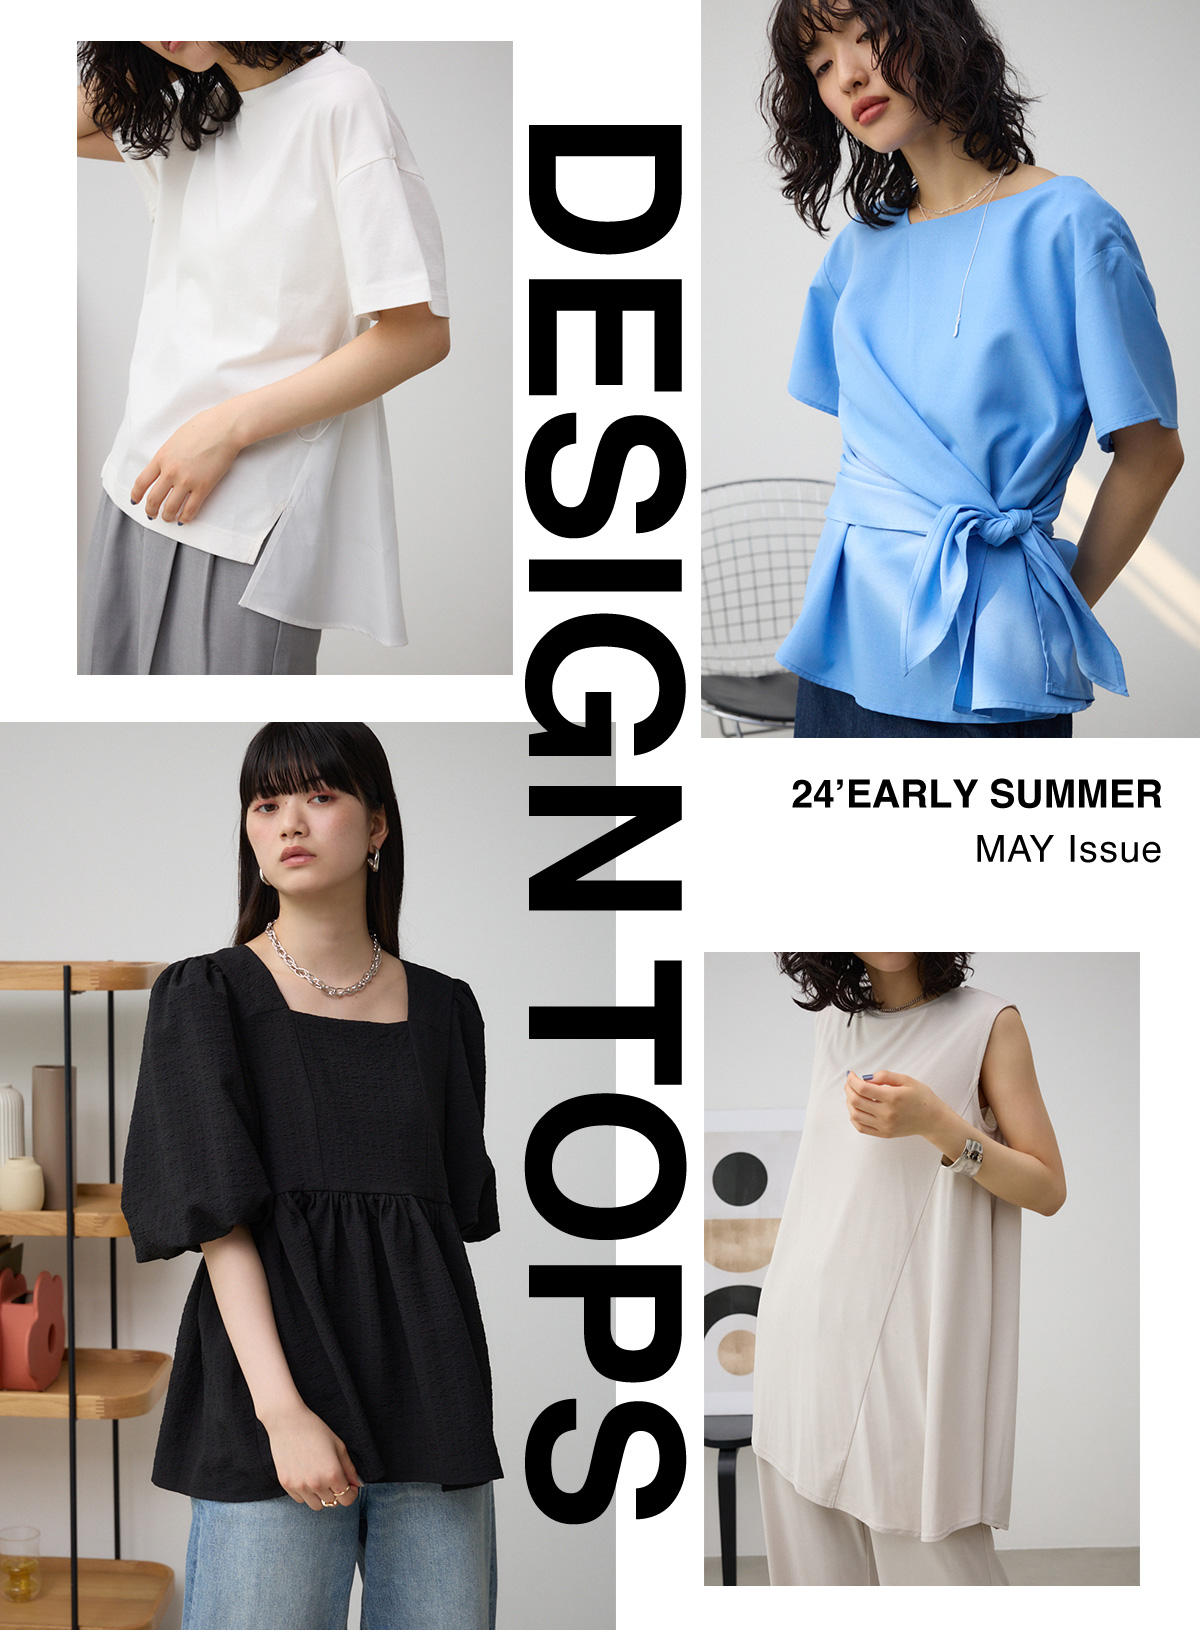 24‘EARLY SUMMER MAY Issue DESIGN TOPS for WOMEN